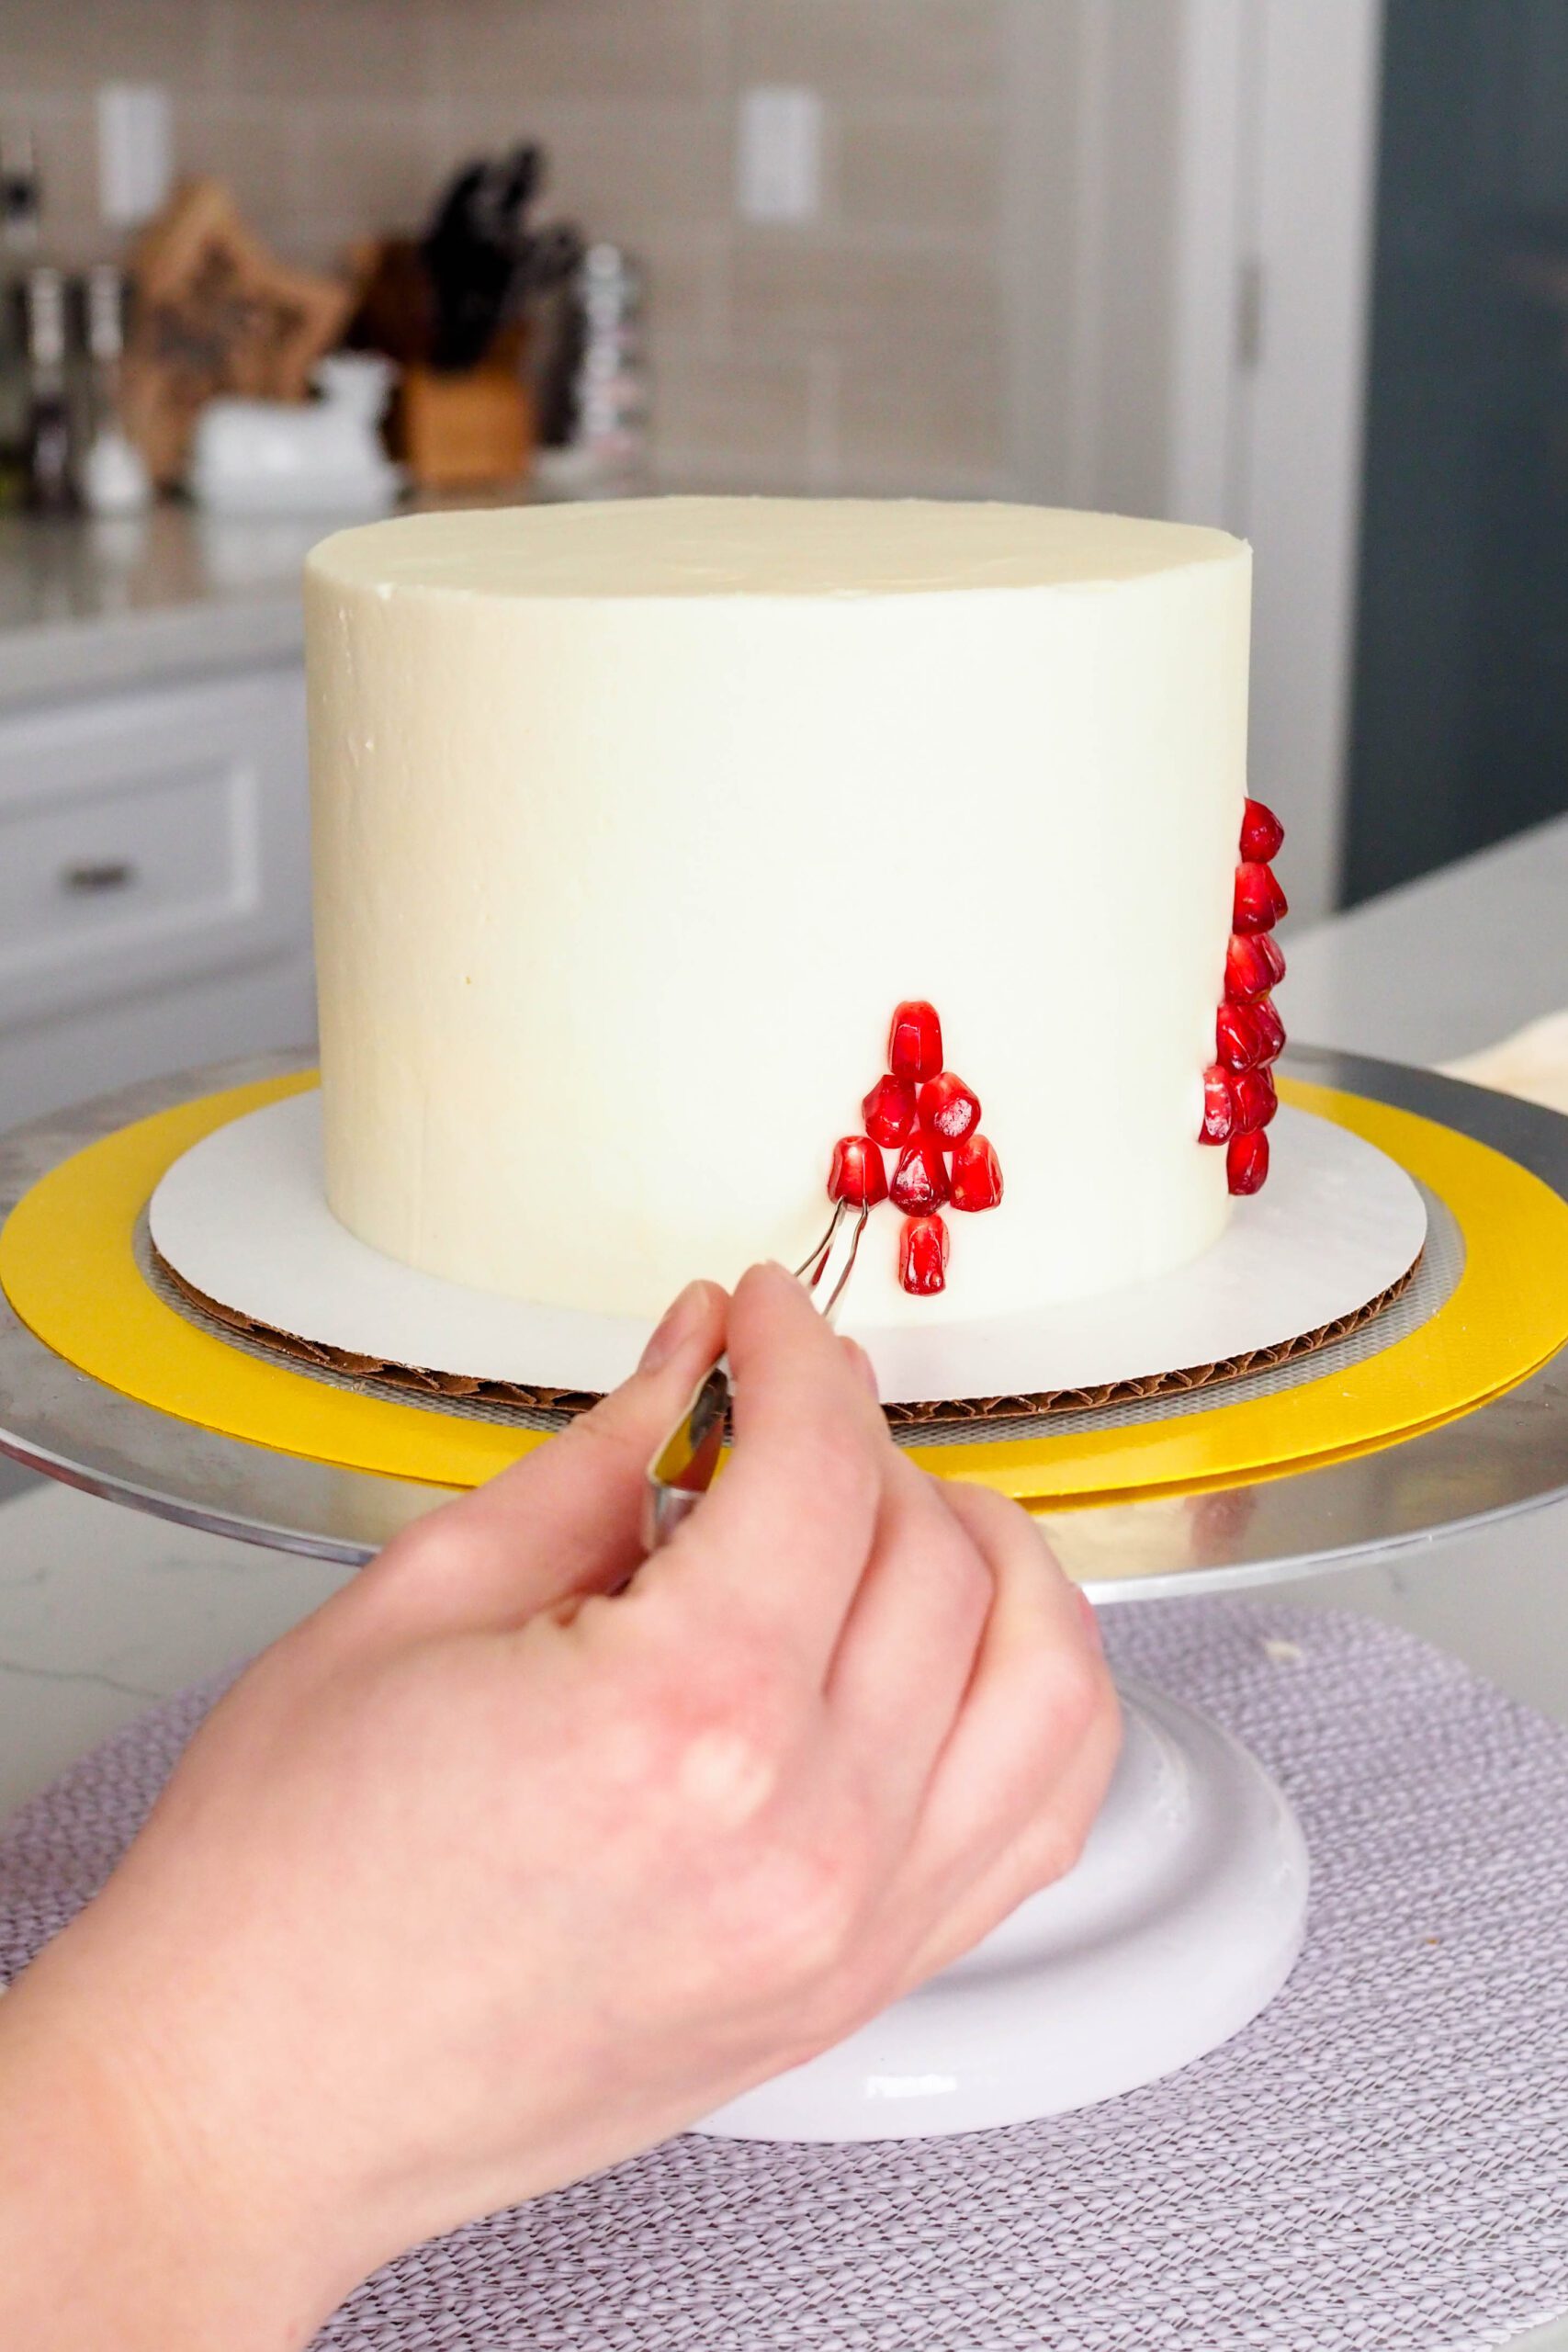 A hand uses decorating tweezers to place pomegranate arils on the side of a cake.